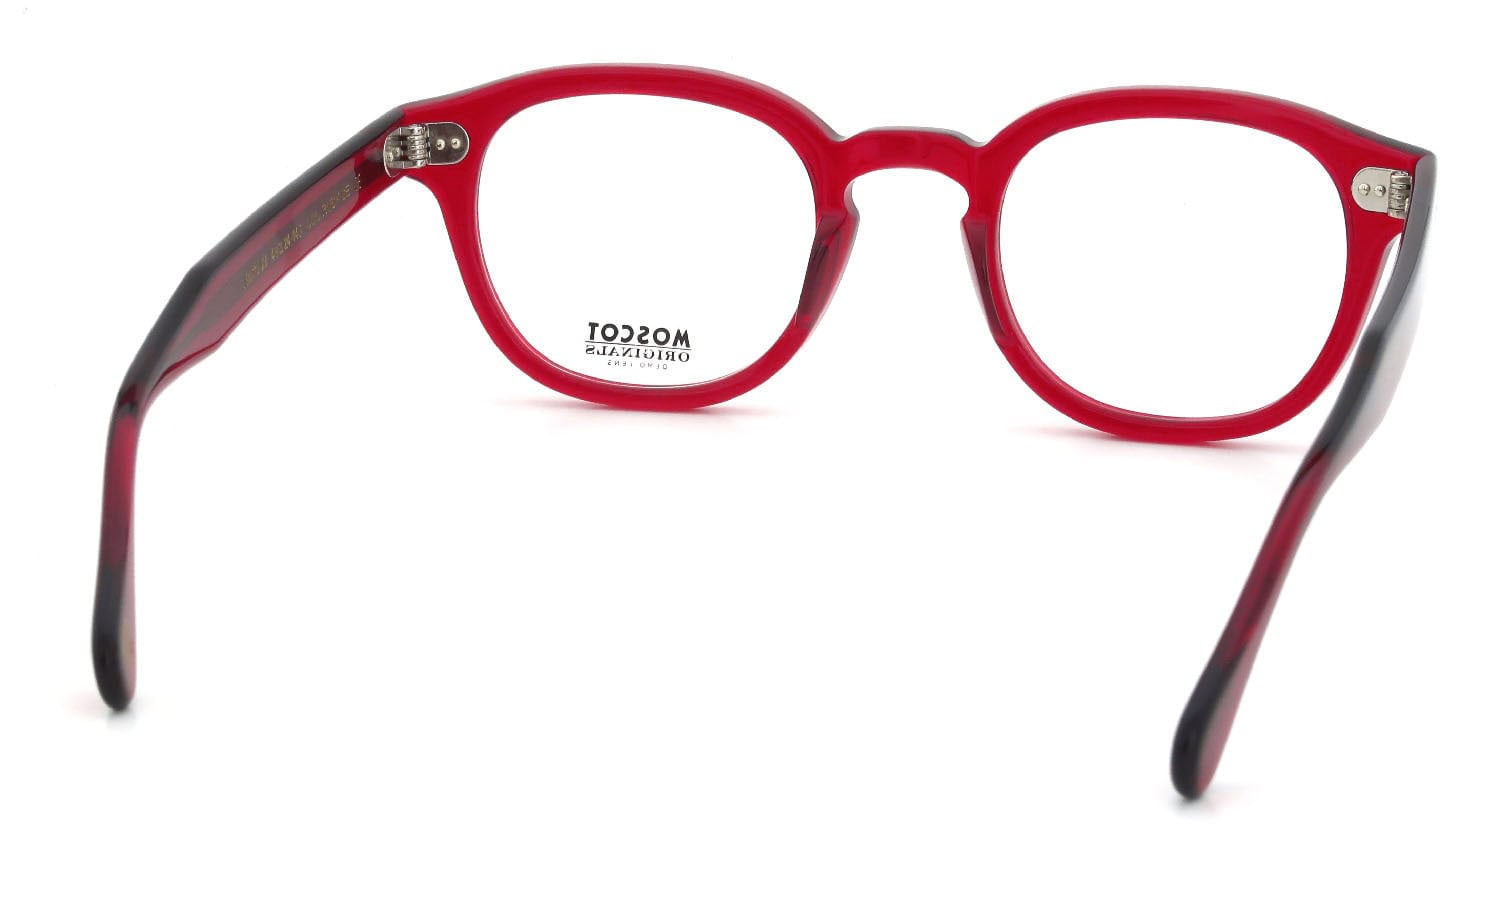 MOSCOT LEMTOSH RUBY 49size 通販